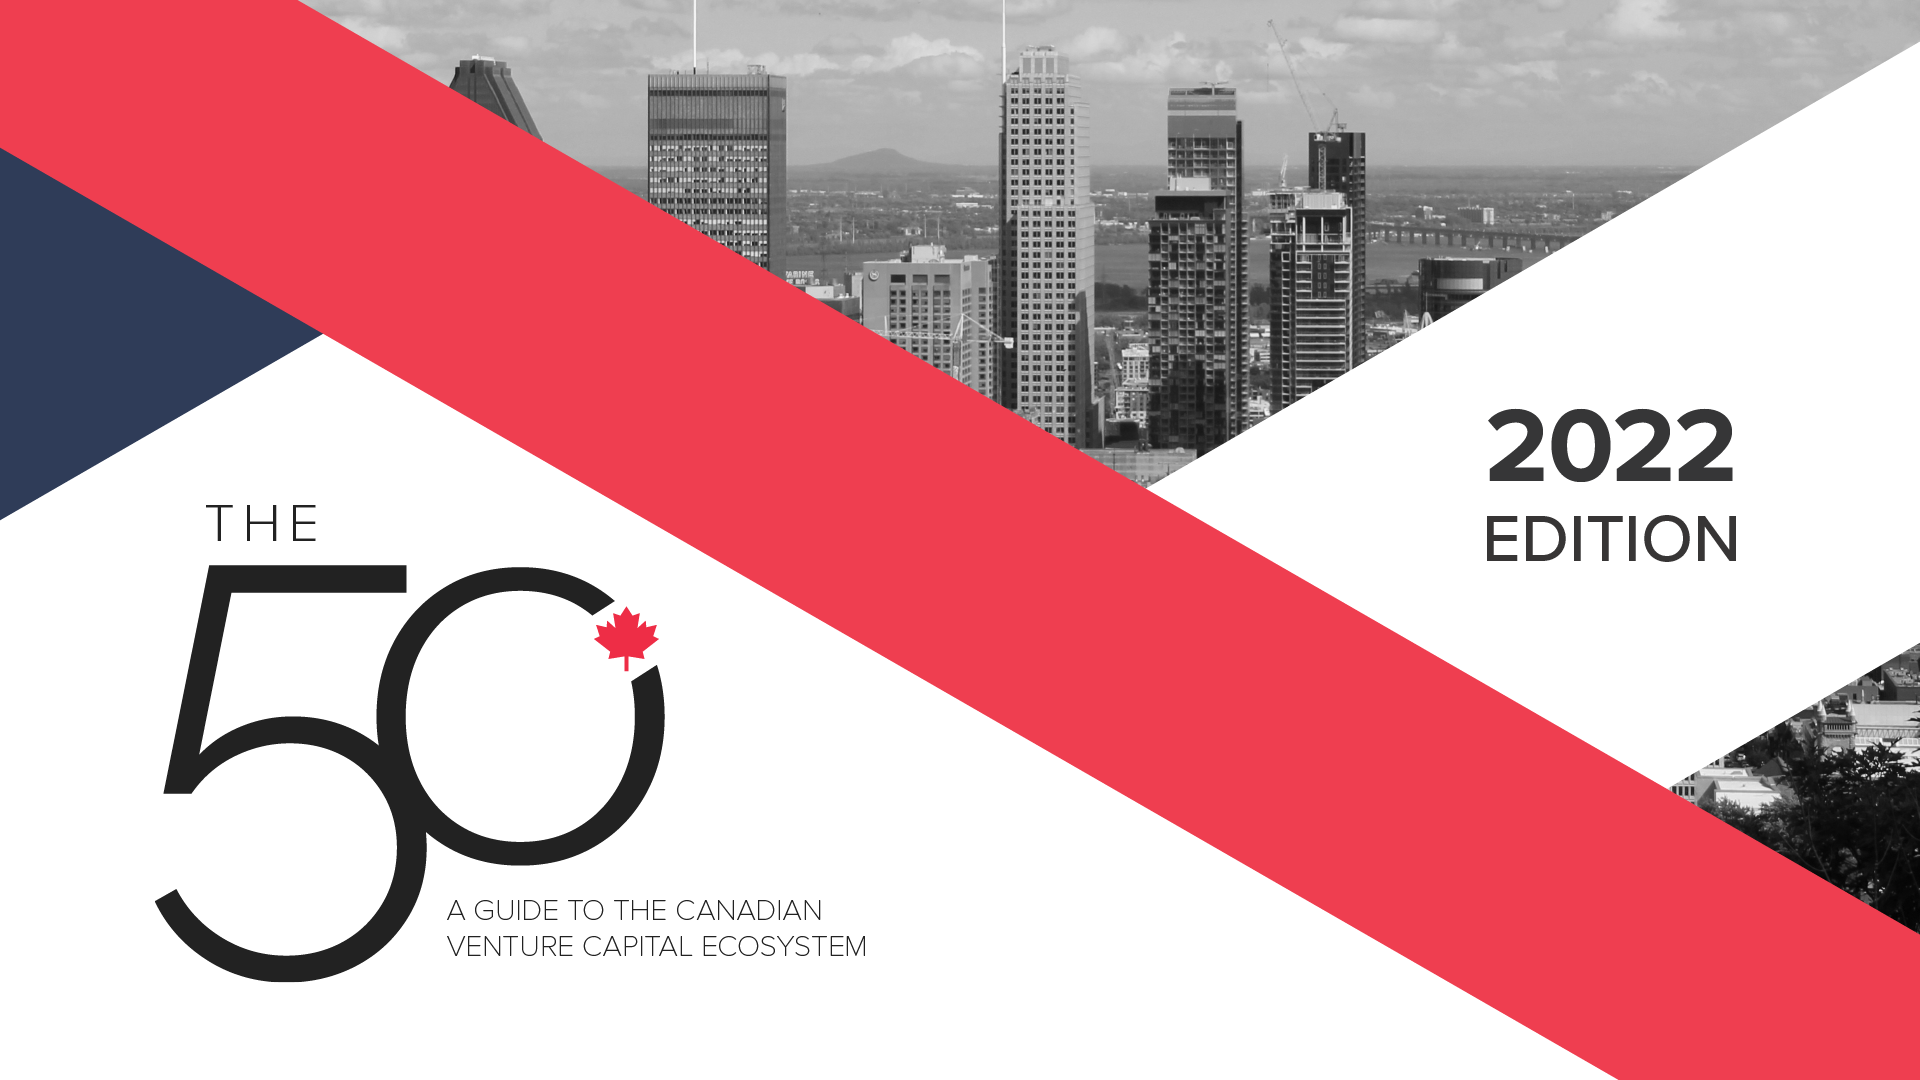 2022 - The 50: A Guide to the Canadian Venture Capital Ecosystem